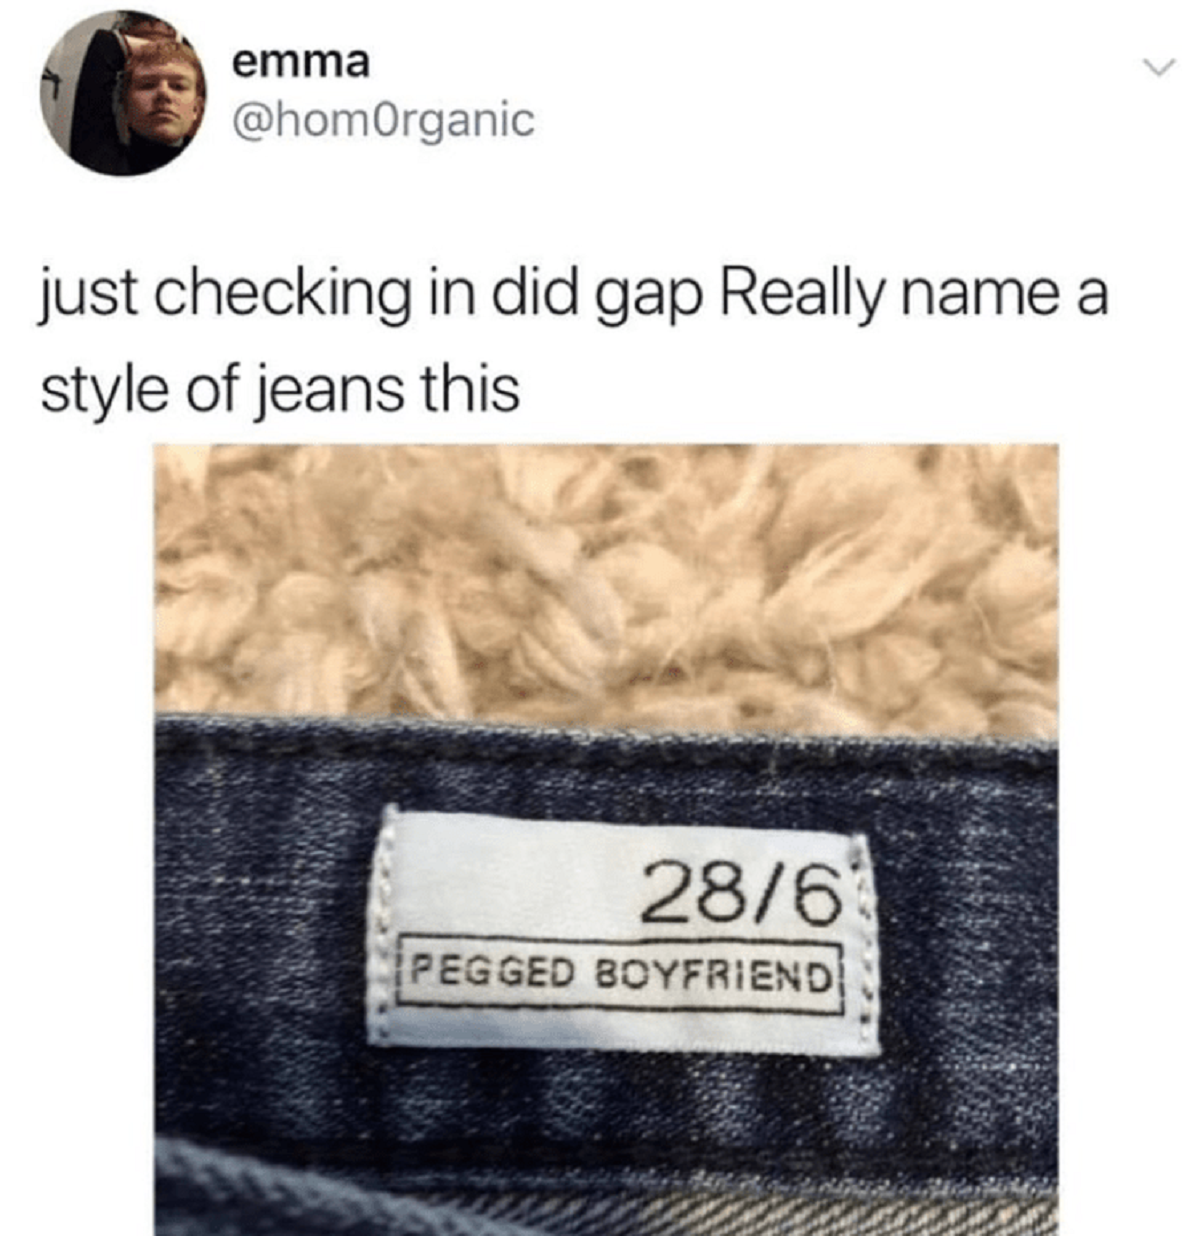 spicy memes -  wool - emma just checking in did gap Really name a style of jeans this 286 Pegged Boyfriend